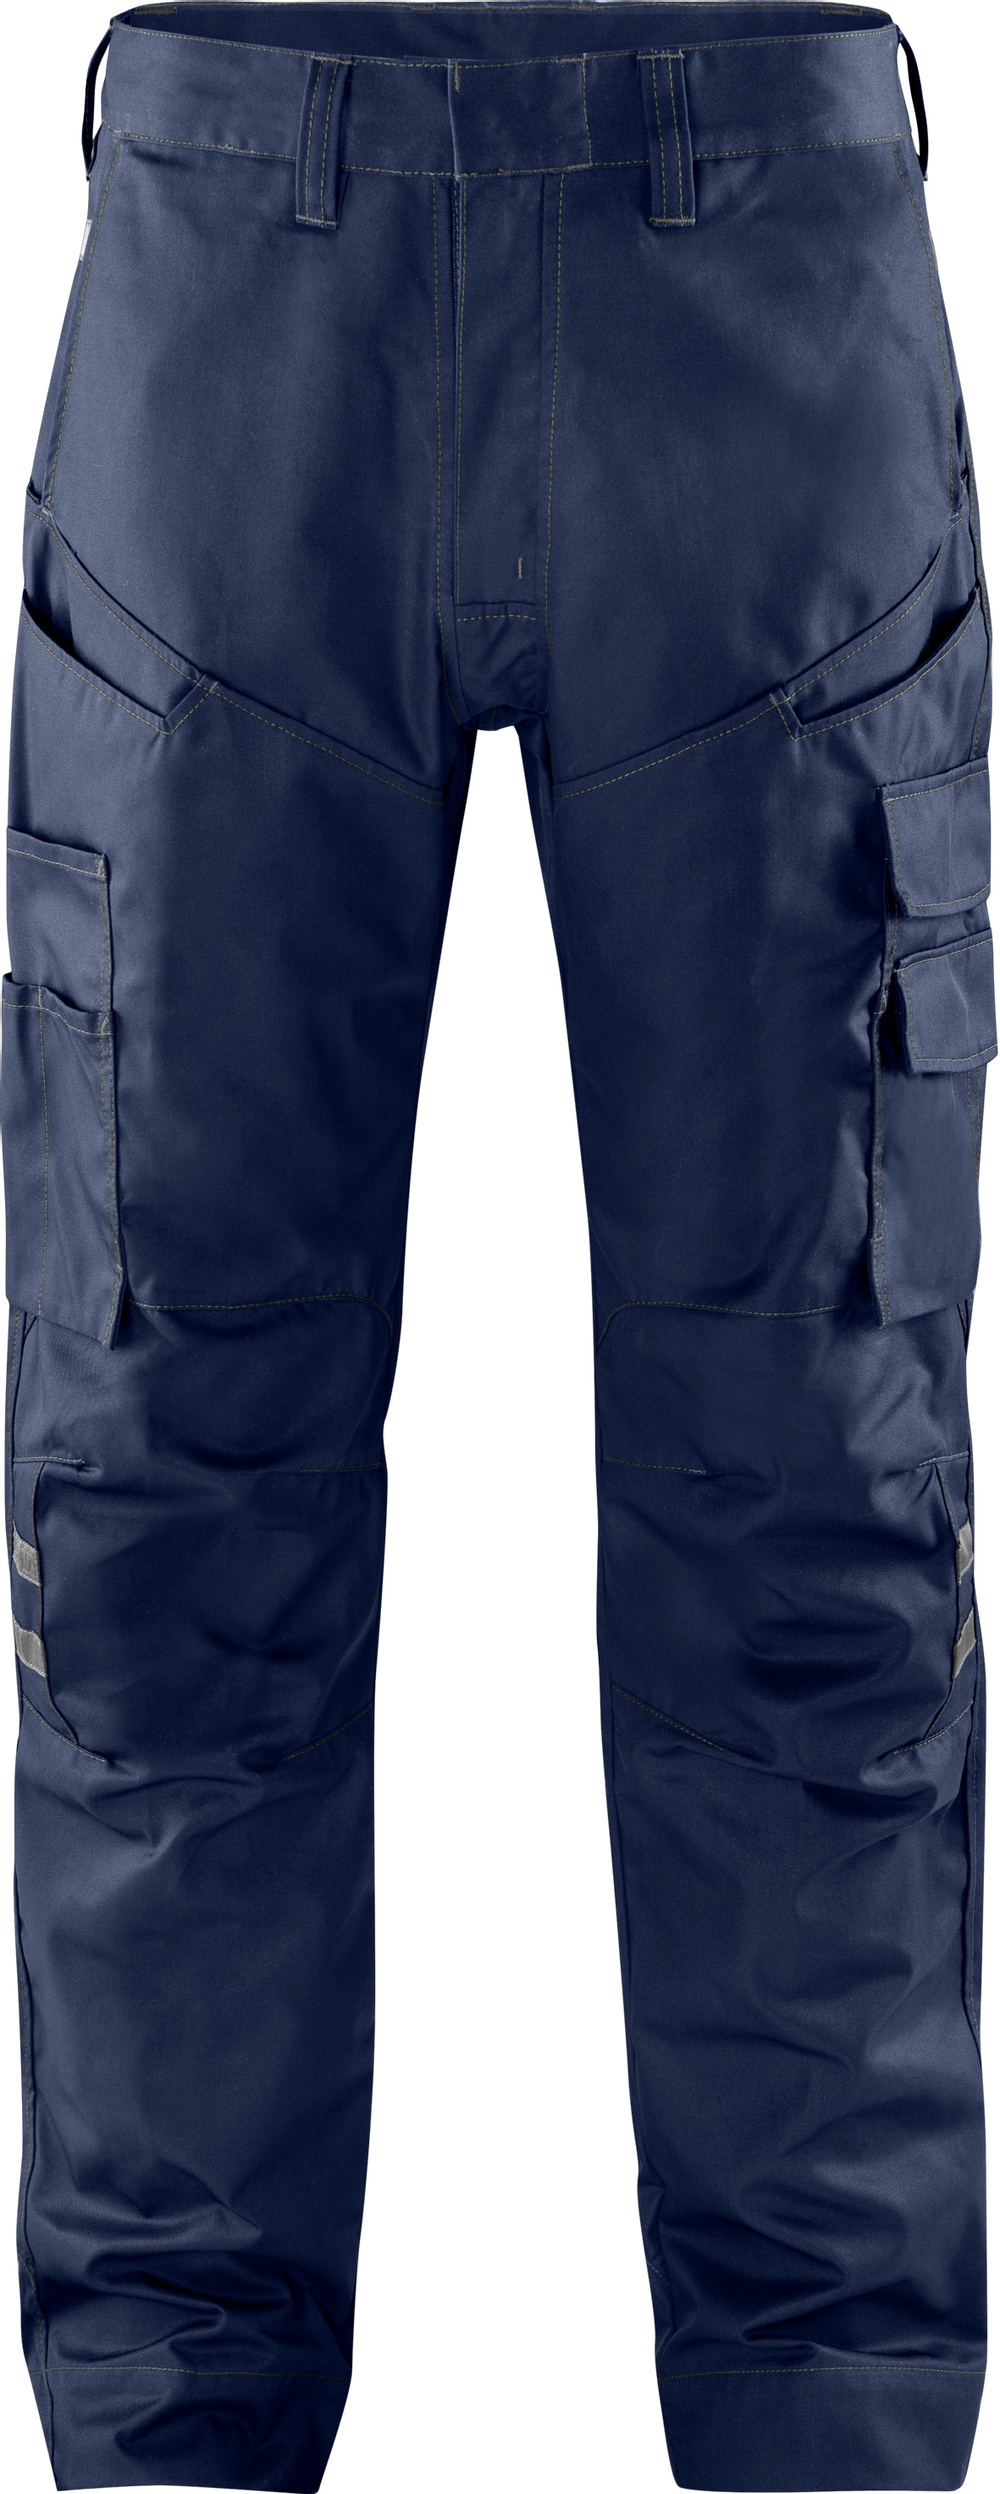 Fristads Green Fusion trousers have nearly half of the climate impact compared with conventionally produced trousers.